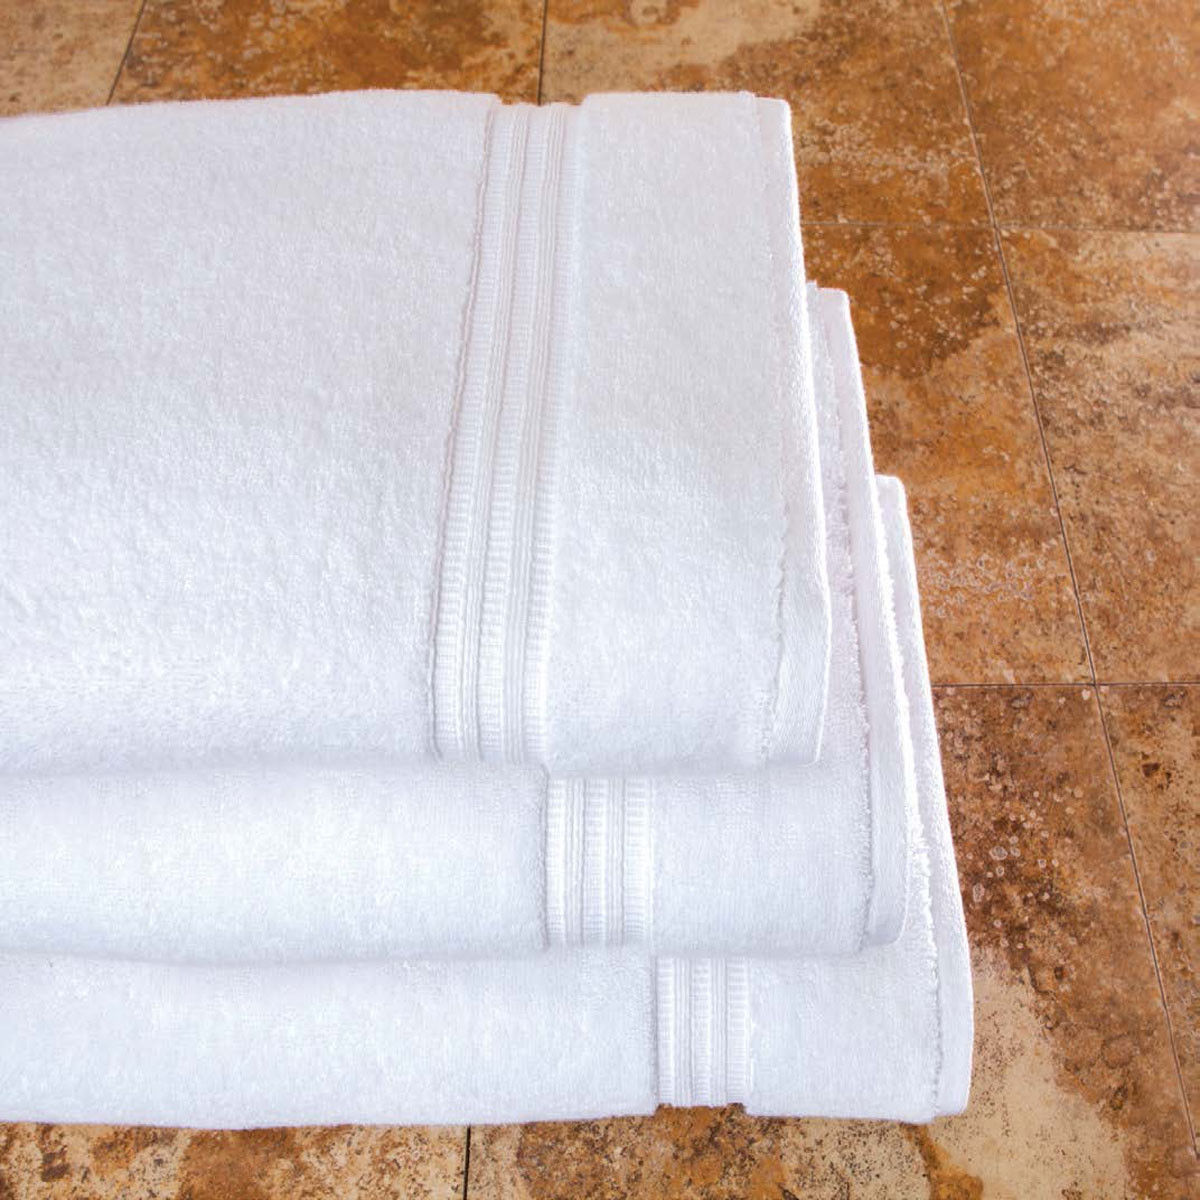 Is the Villa de Lucca towel collection from Villa di Borghese highly absorbent?